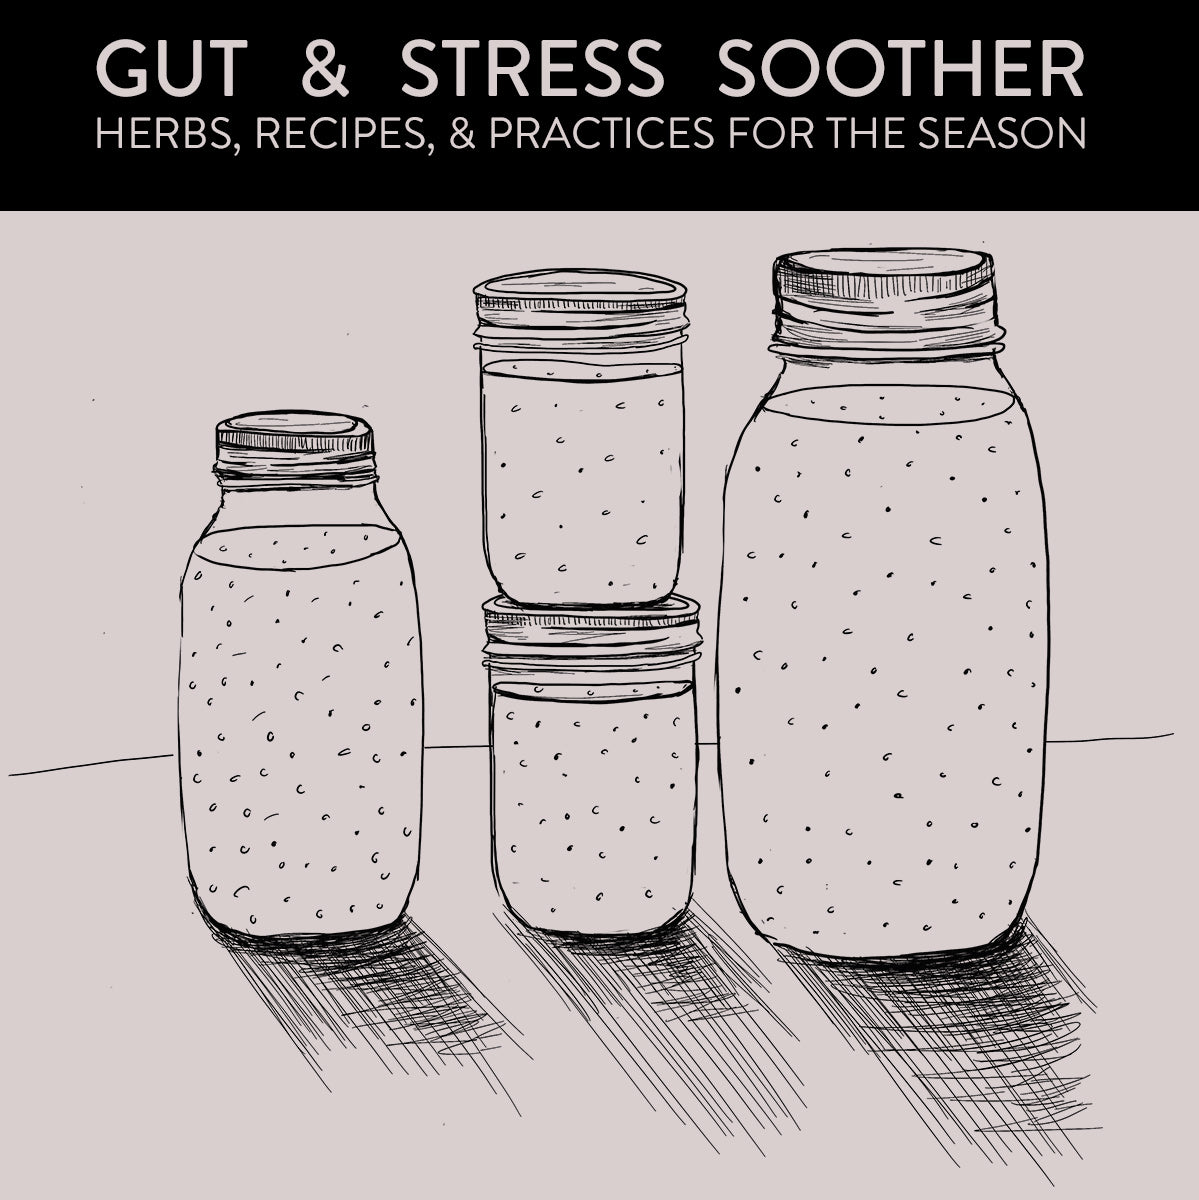 Winter Gut & Stress Soother Guide